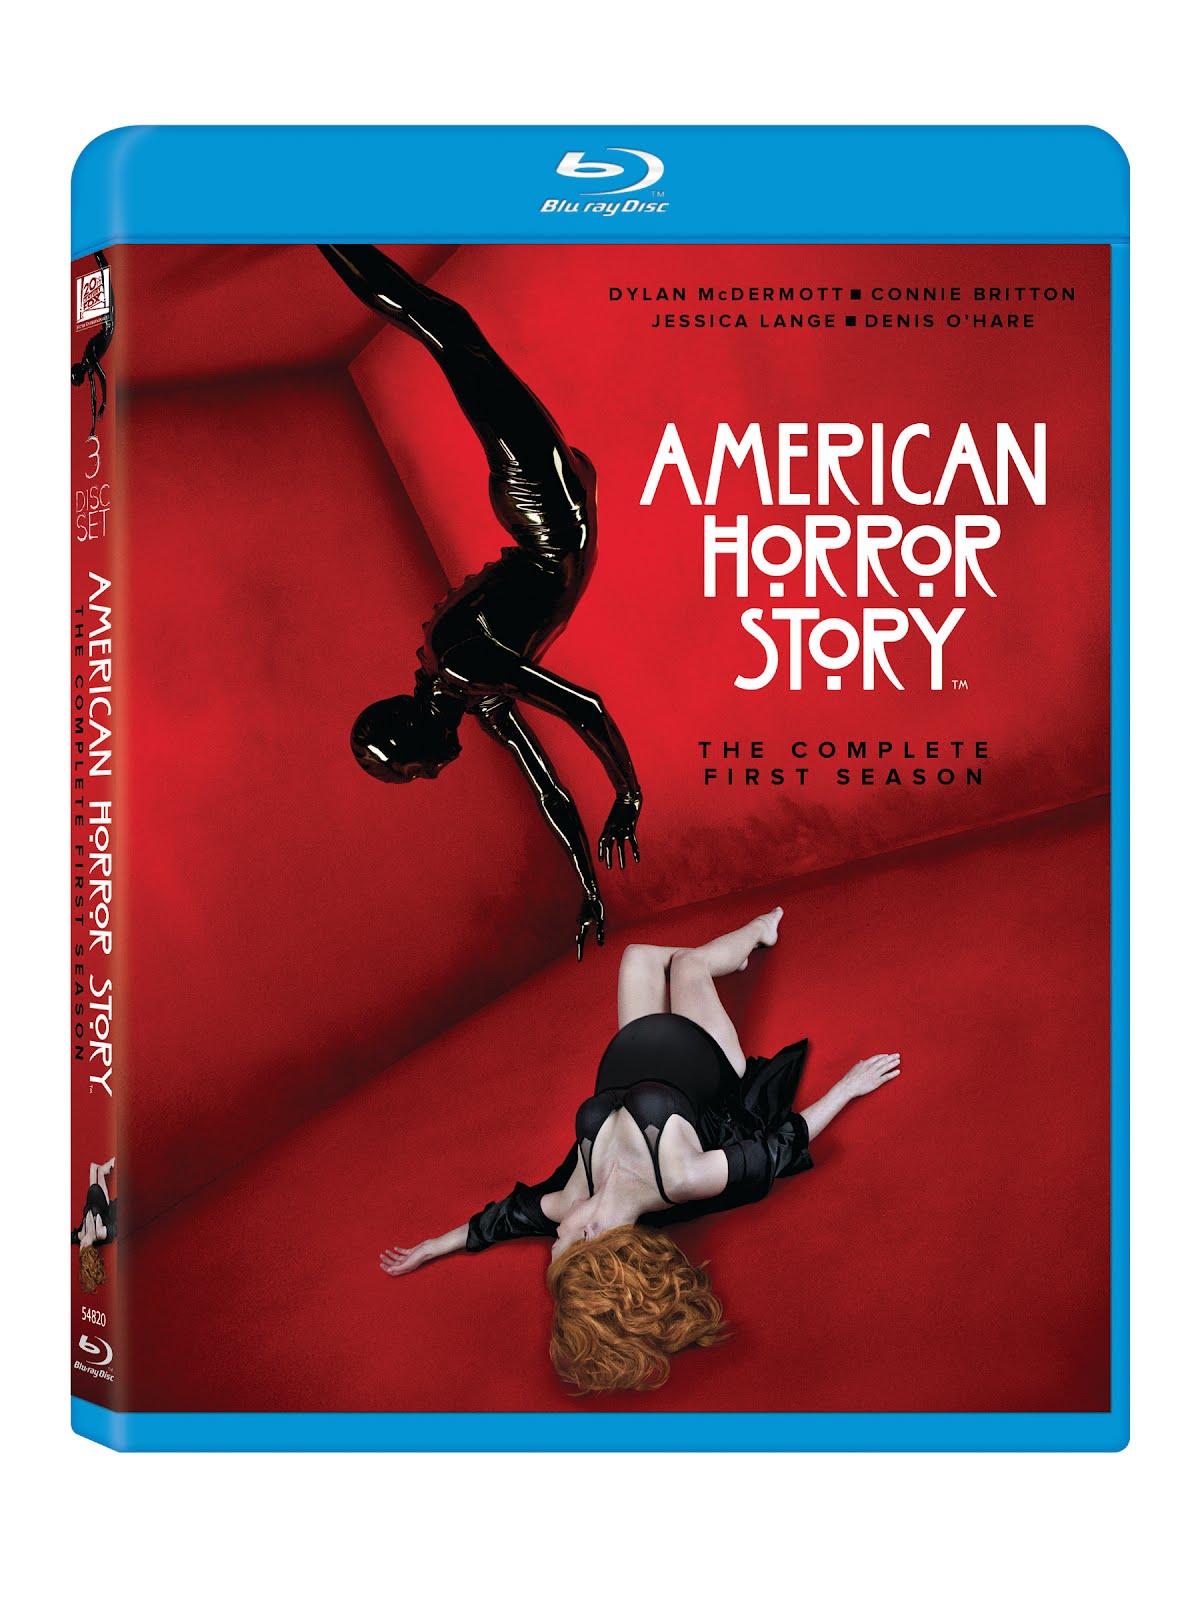 AMERICAN HORROR STORY Season One Available on Blu-ray/DVD September 25th